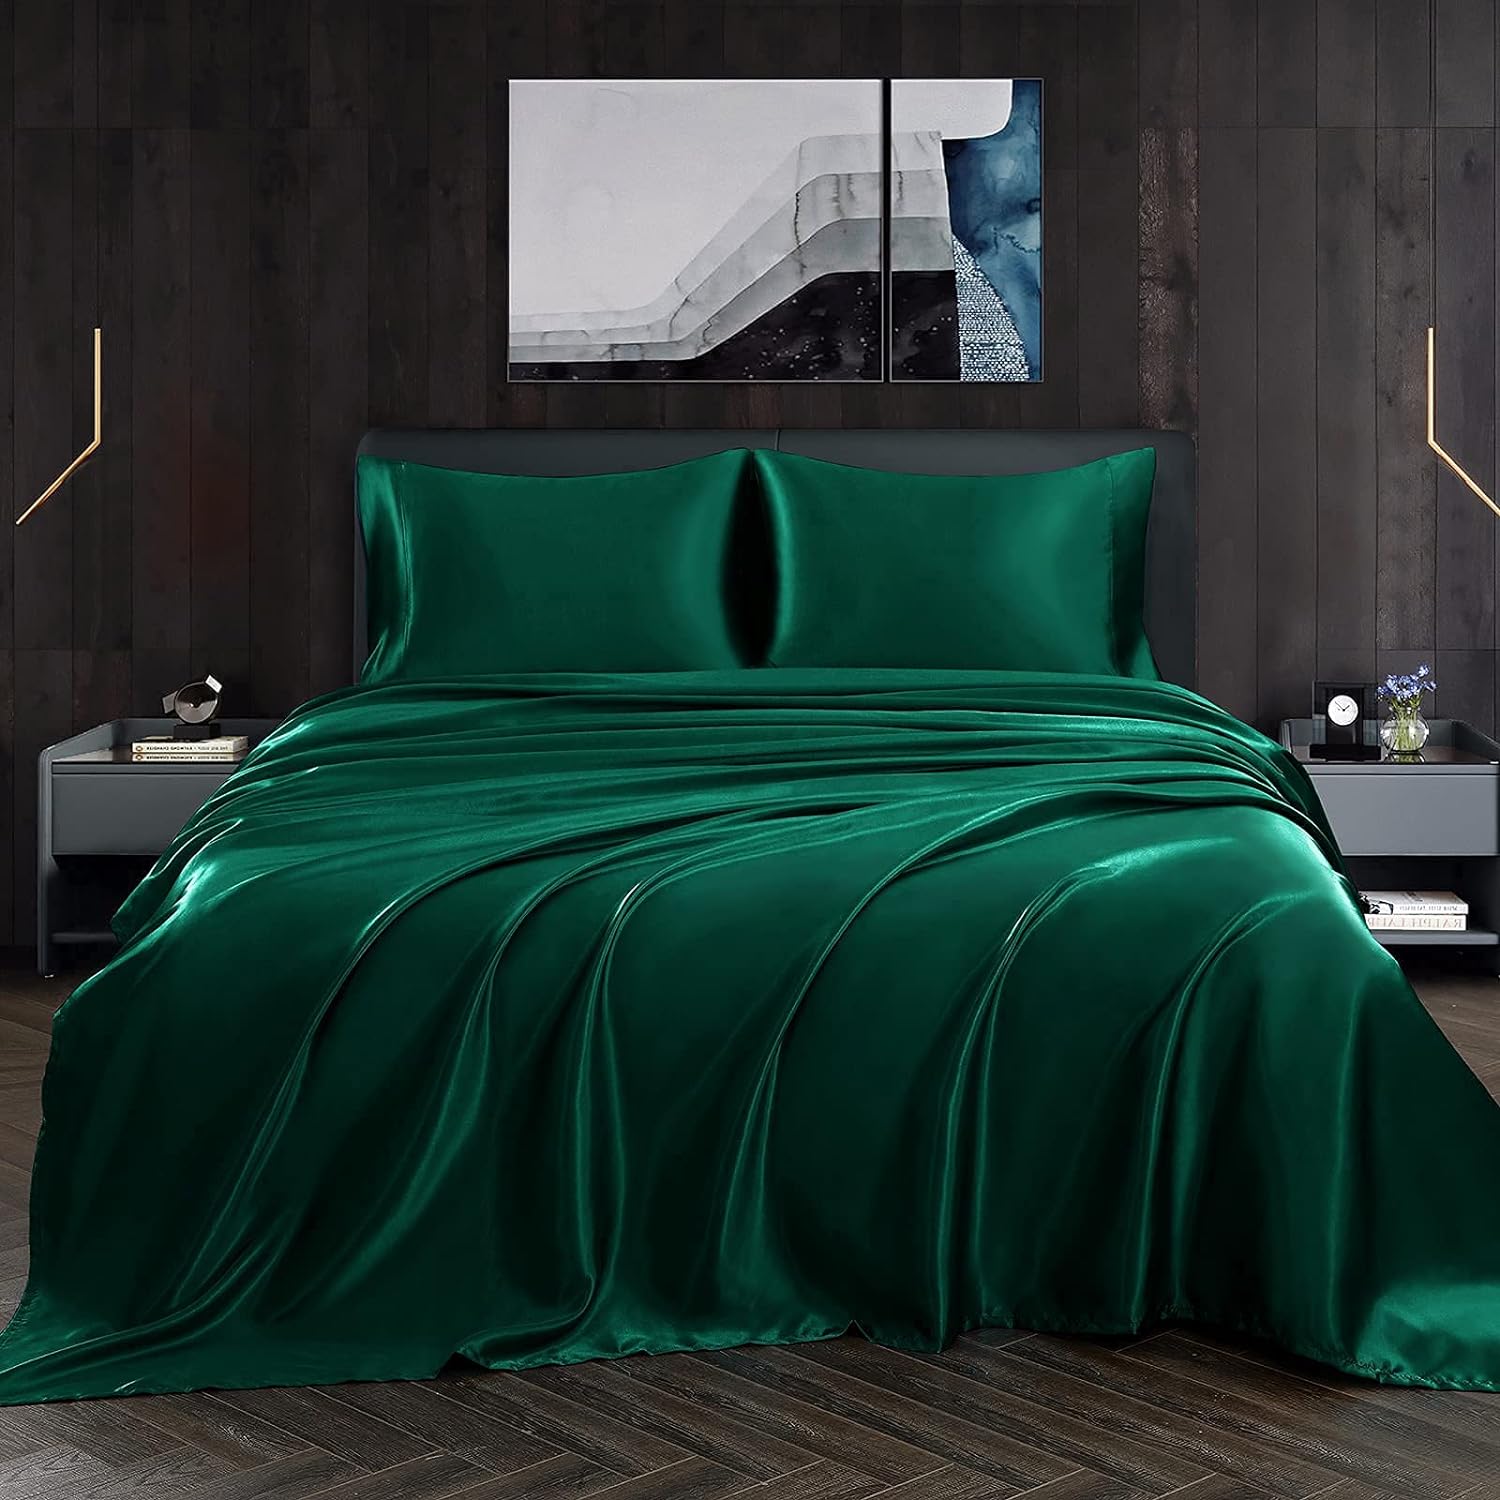 Homiest 4pcs Satin Sheets Set Luxury Silky Satin Bedding Set with Deep Pocket, 1 Fitted Sheet + 1 Flat Sheet + 2 Pillowcases (Full Size, Blackish Green)